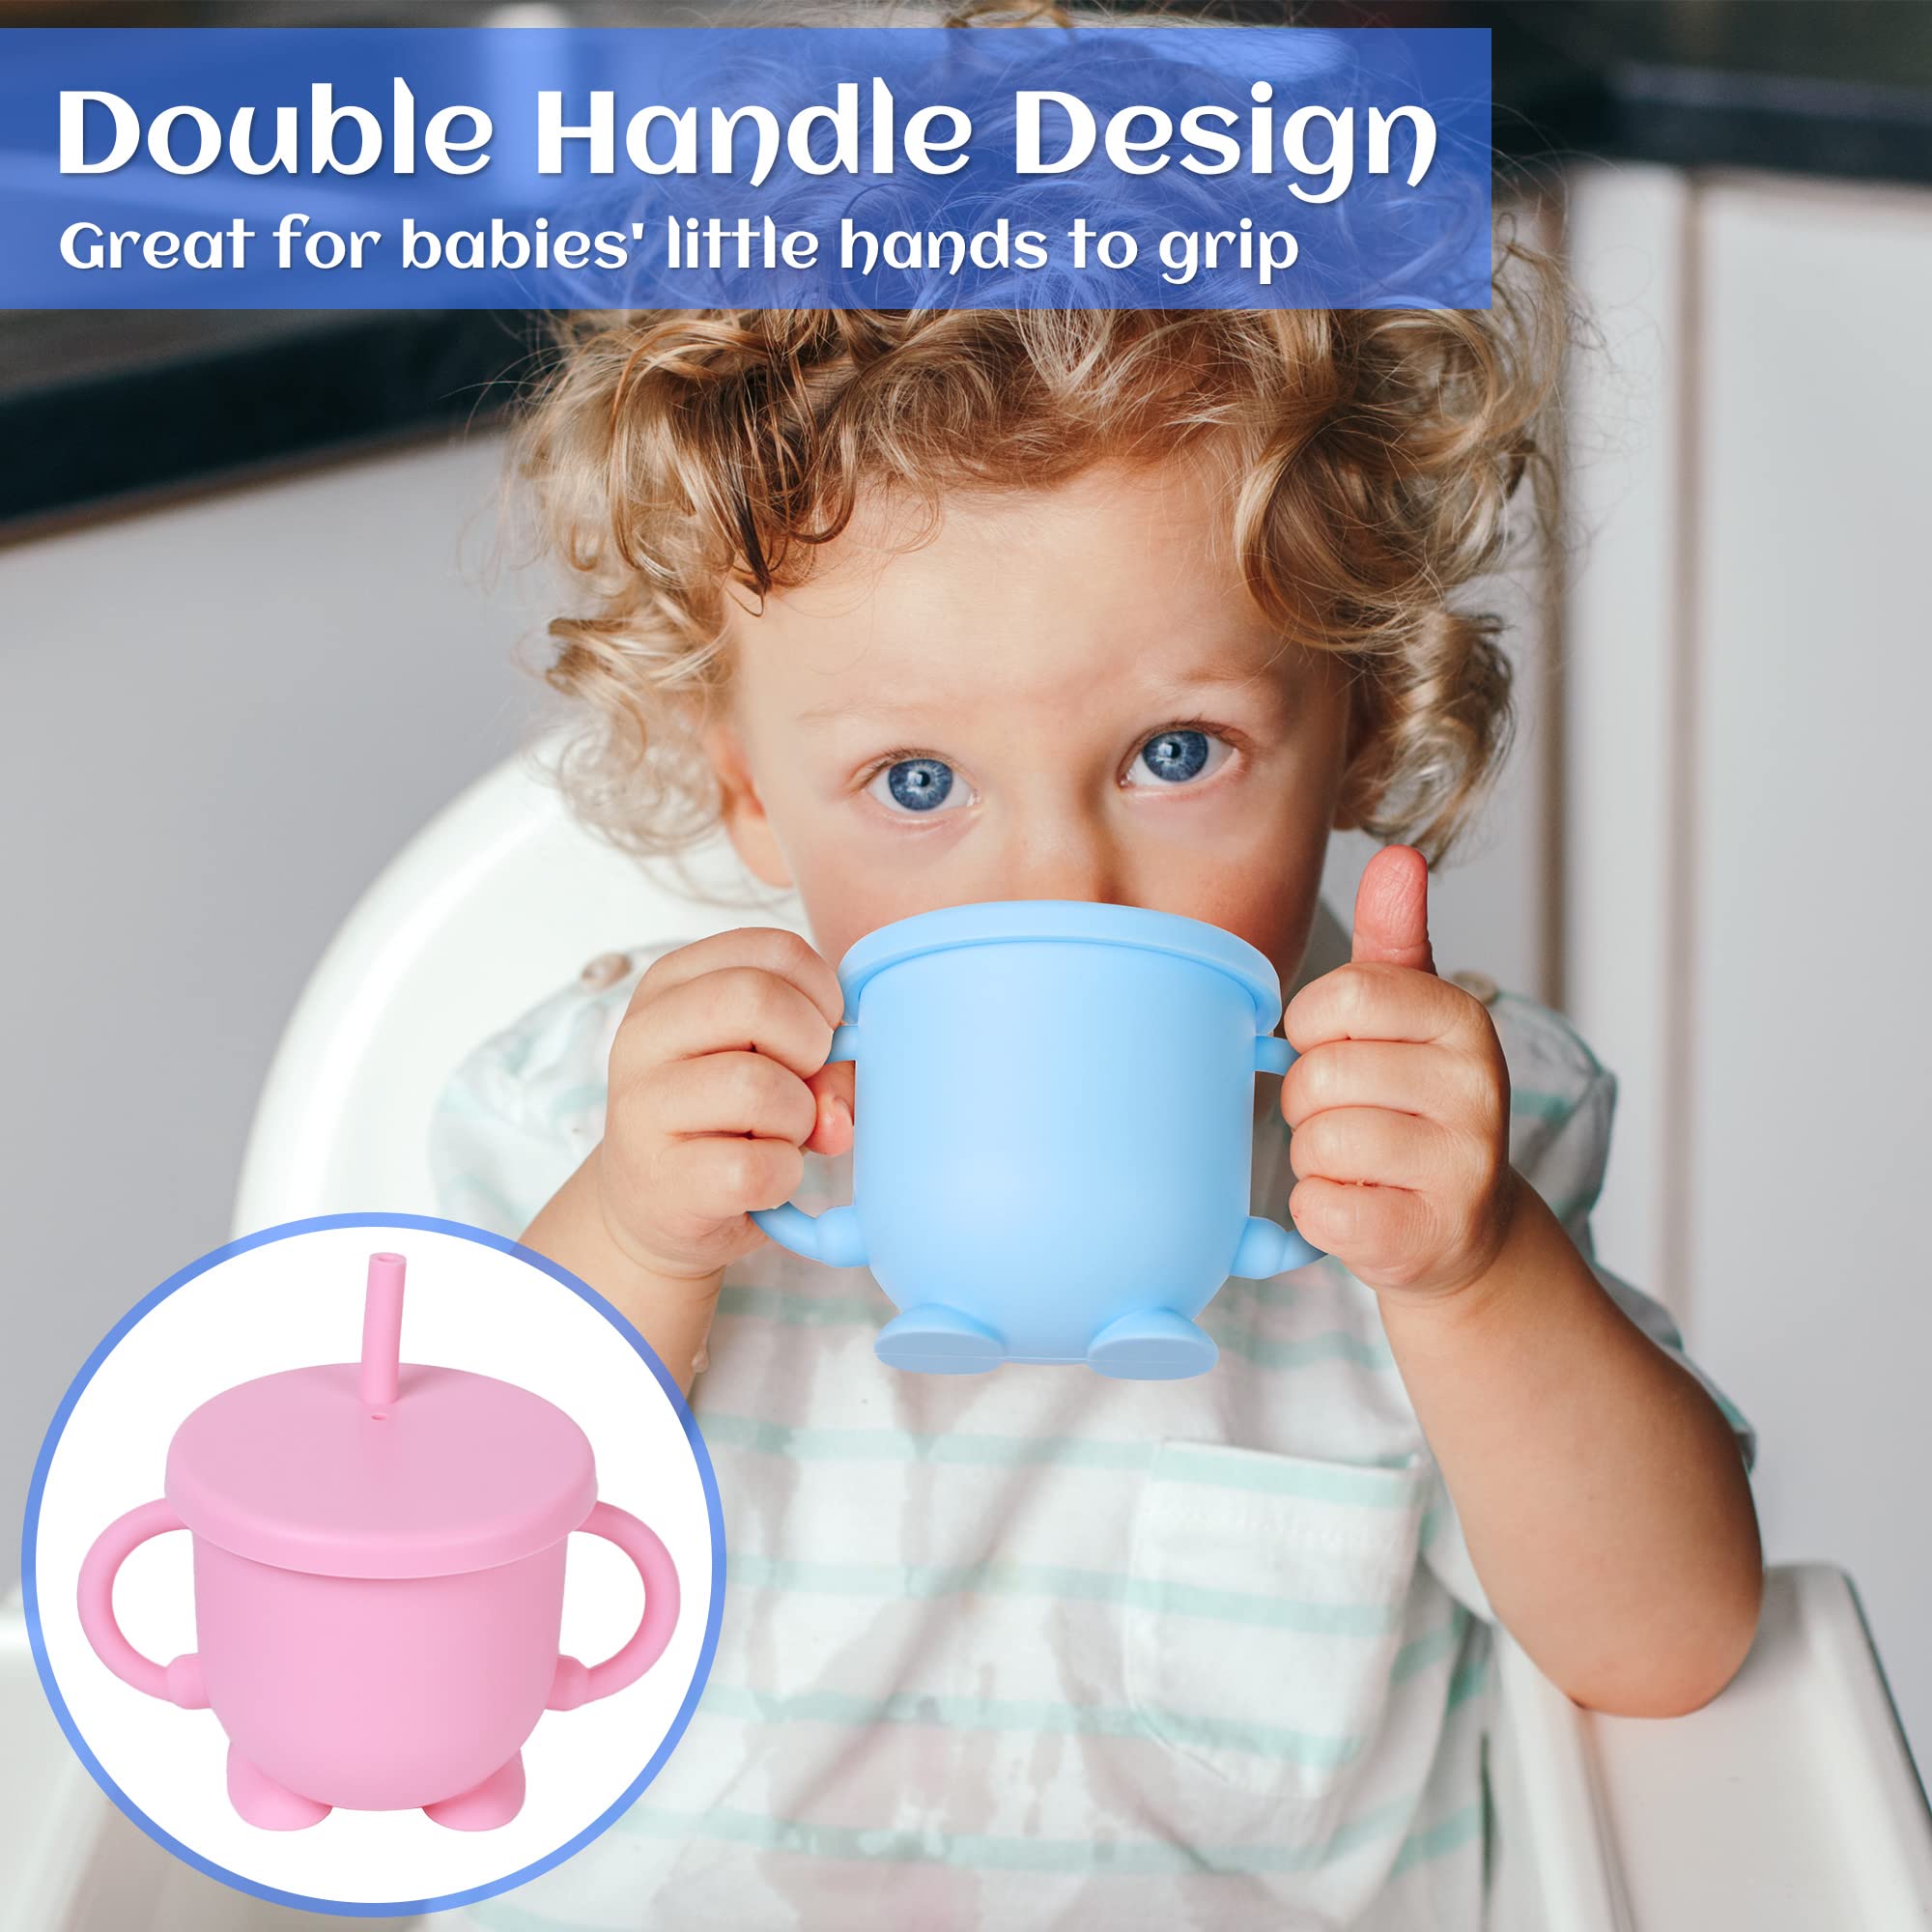 Mytium Snack Cups for Toddlers,2 in 1 Silicone Snack Cup+Straw with Adjustable Strap,2PCS No Spill Toddler Snack Containers Baby Training Cup for Toddler and Baby 6 Month+(Blue+Pink)